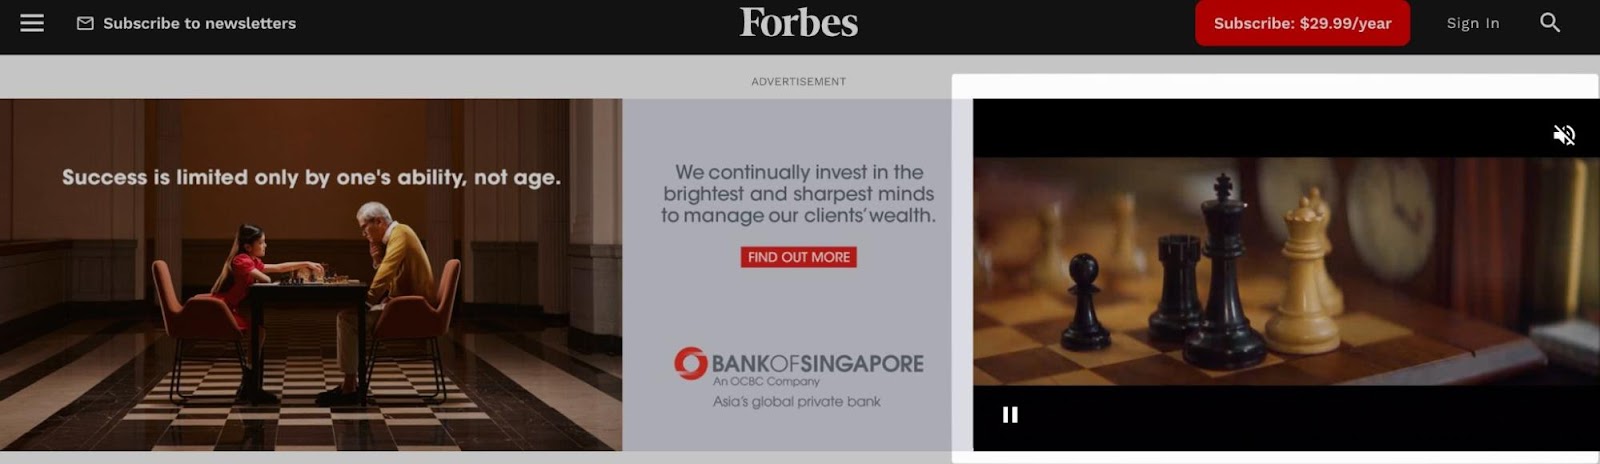 A Bank of Singapore video ad on Forbes’ website